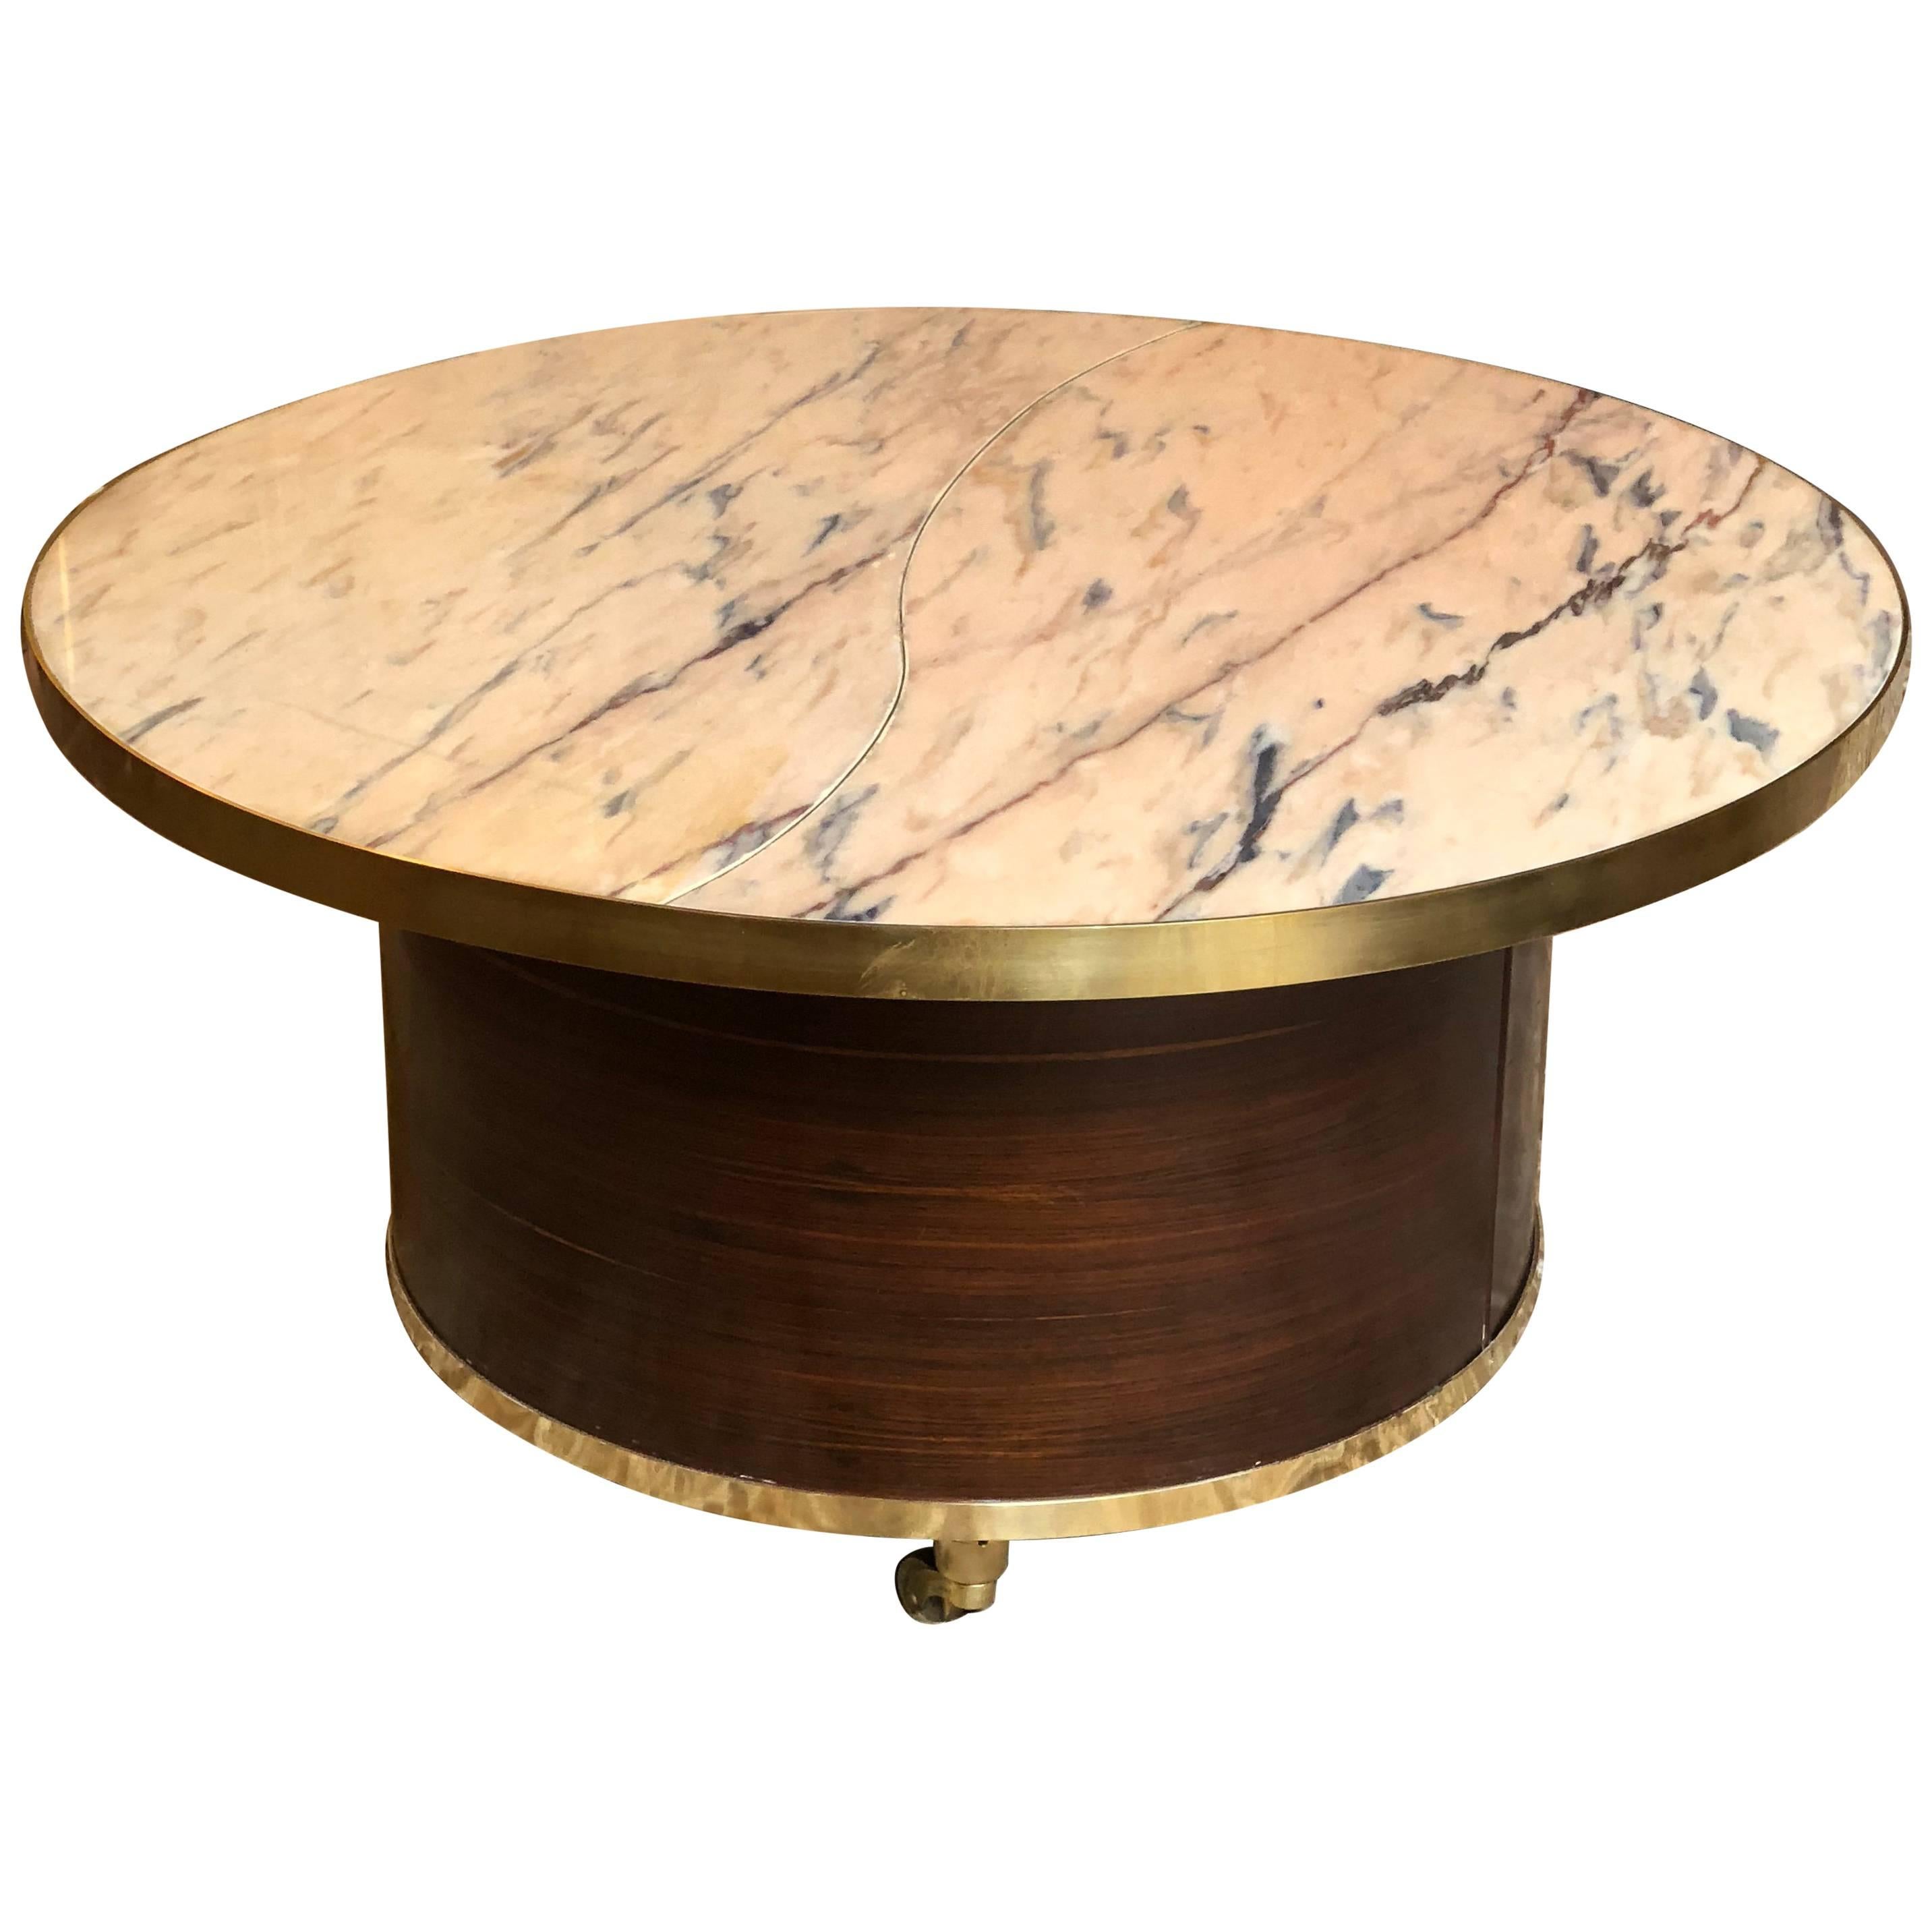 1970s Round Coffee Table with Pink Marble Top, Wood Veneer, Brass Inlay & Wheels